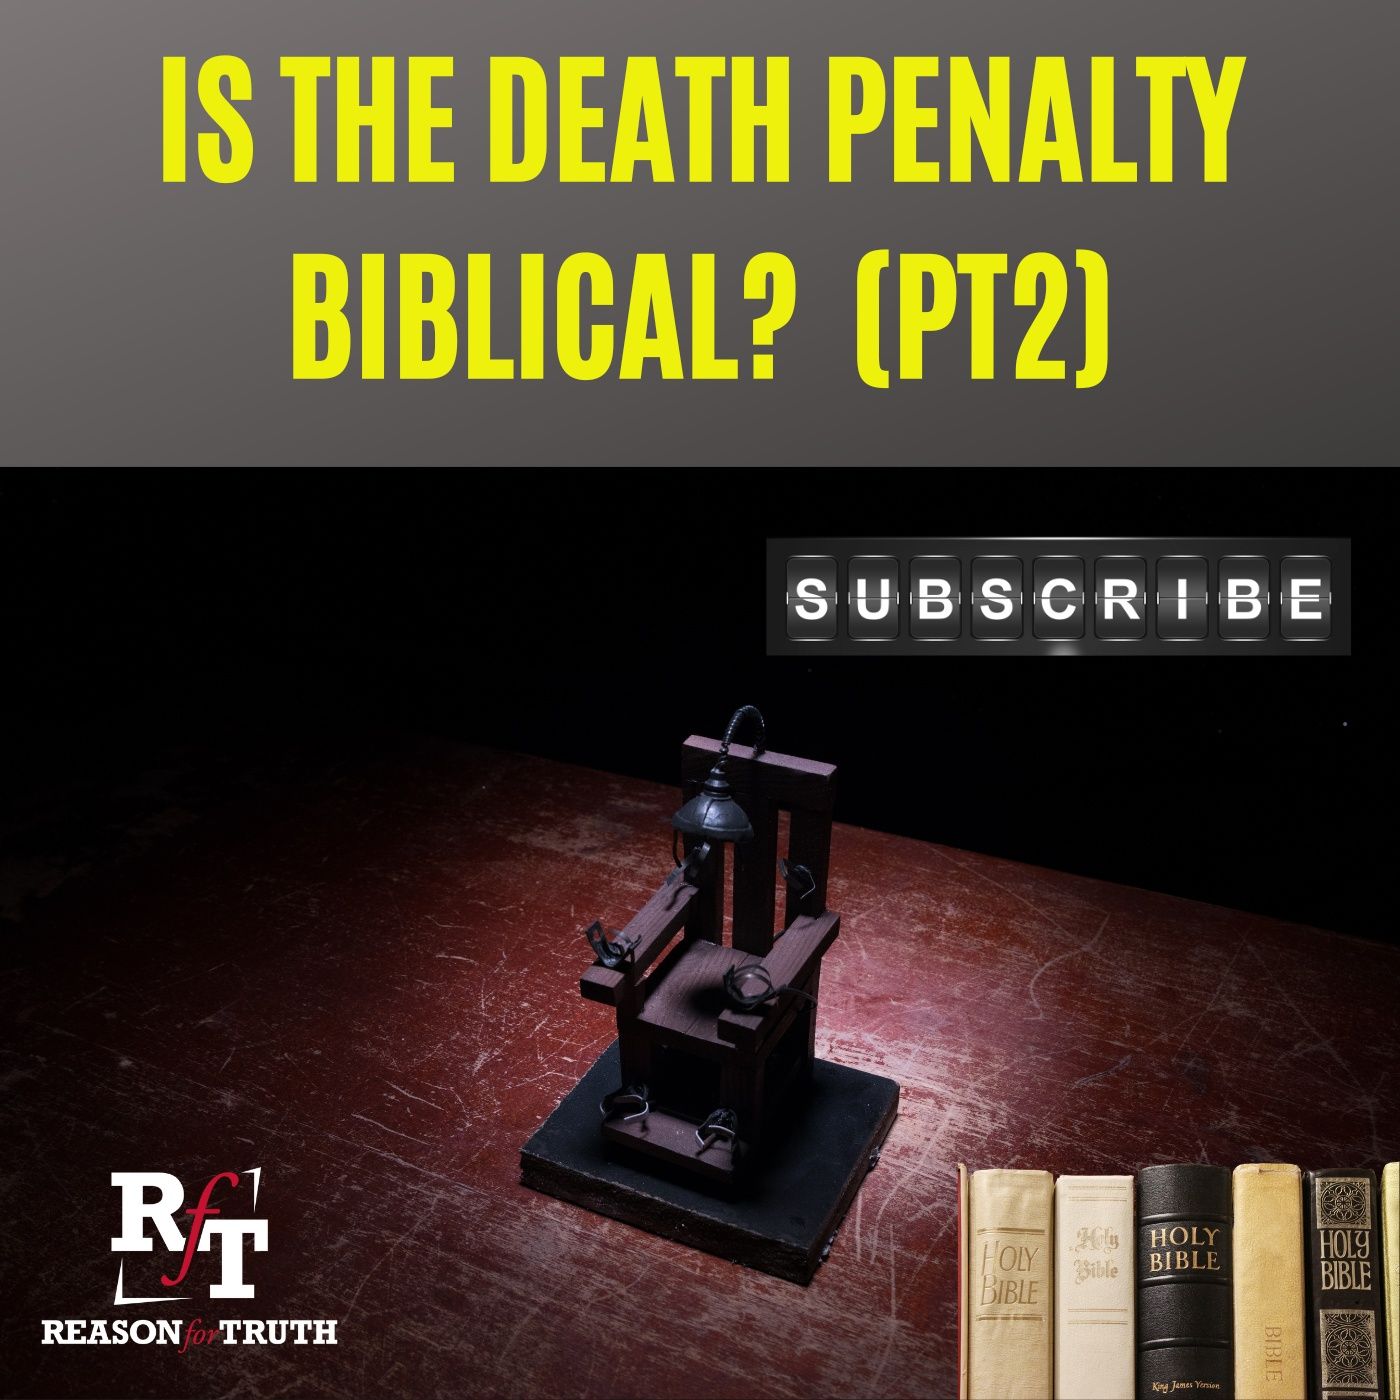 IS THE DEATH PENALTY BIBLICAL (PT2) - 1:18:23, 4.04 PM